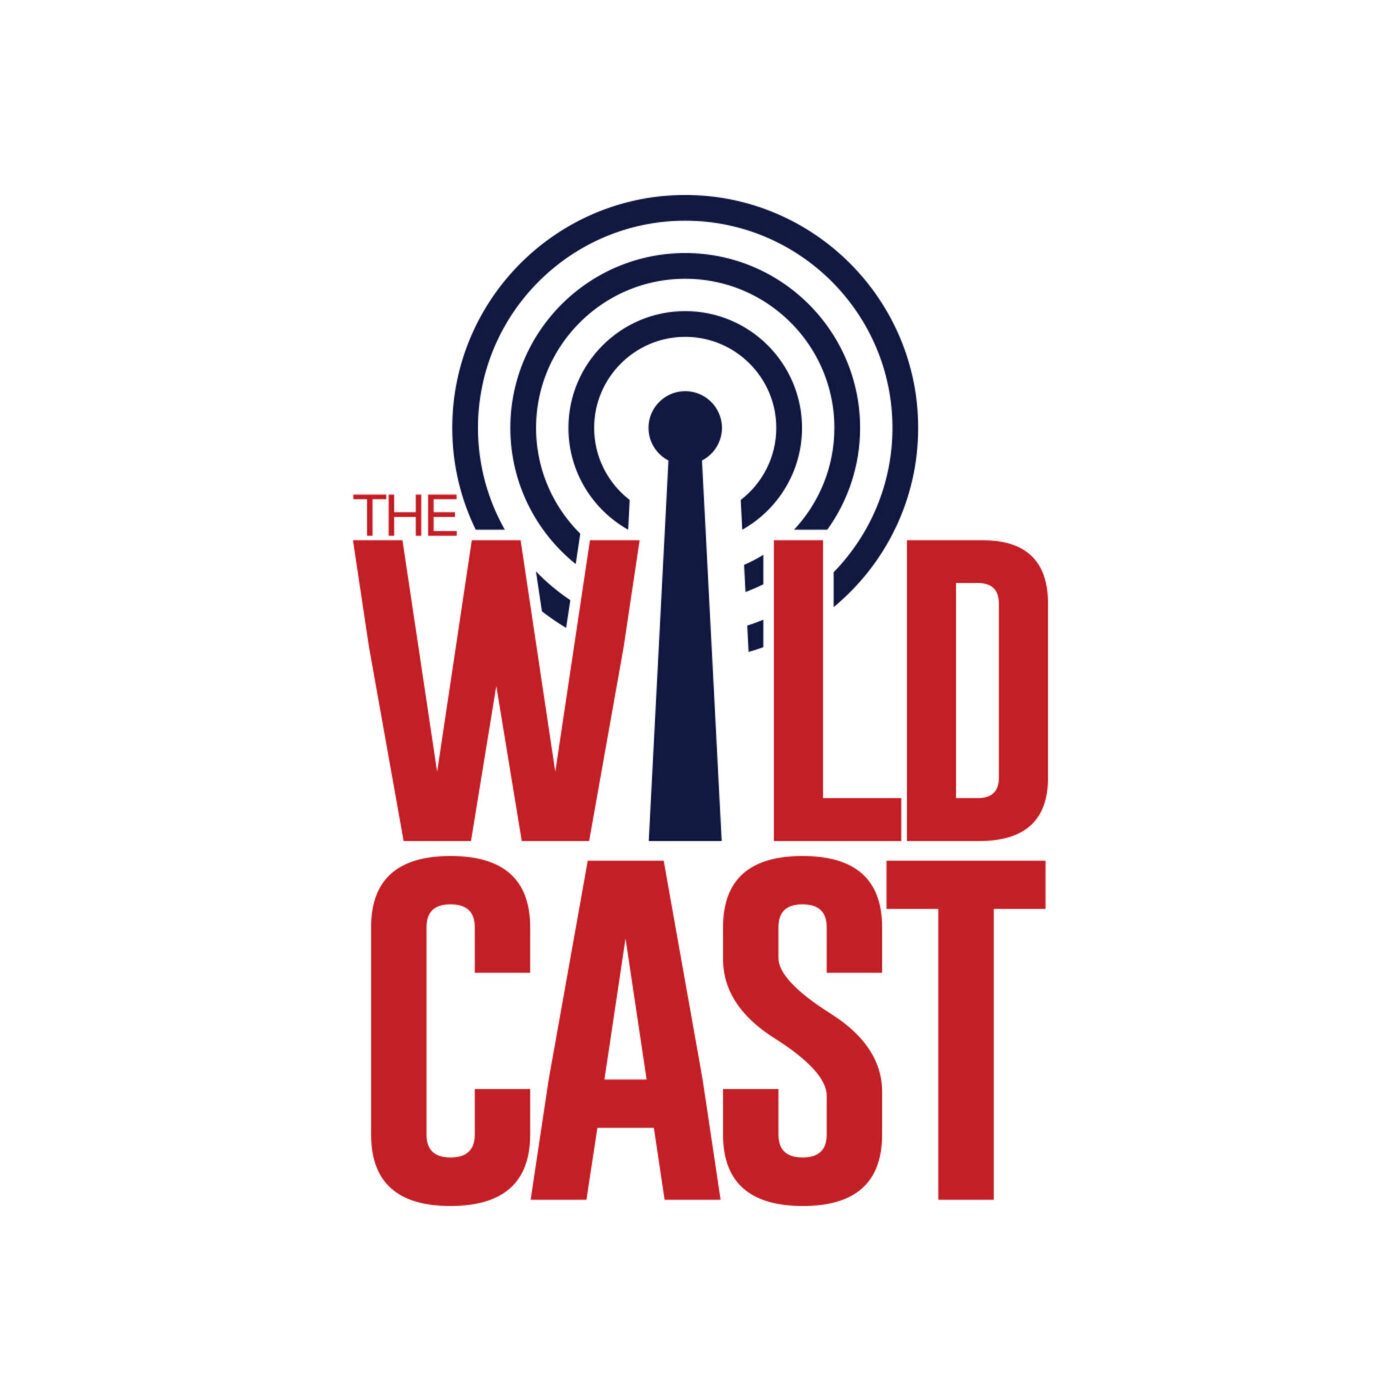 The Wildcast, Episode 394: What is the path to victory for Arizona against No. 12 Oregon?